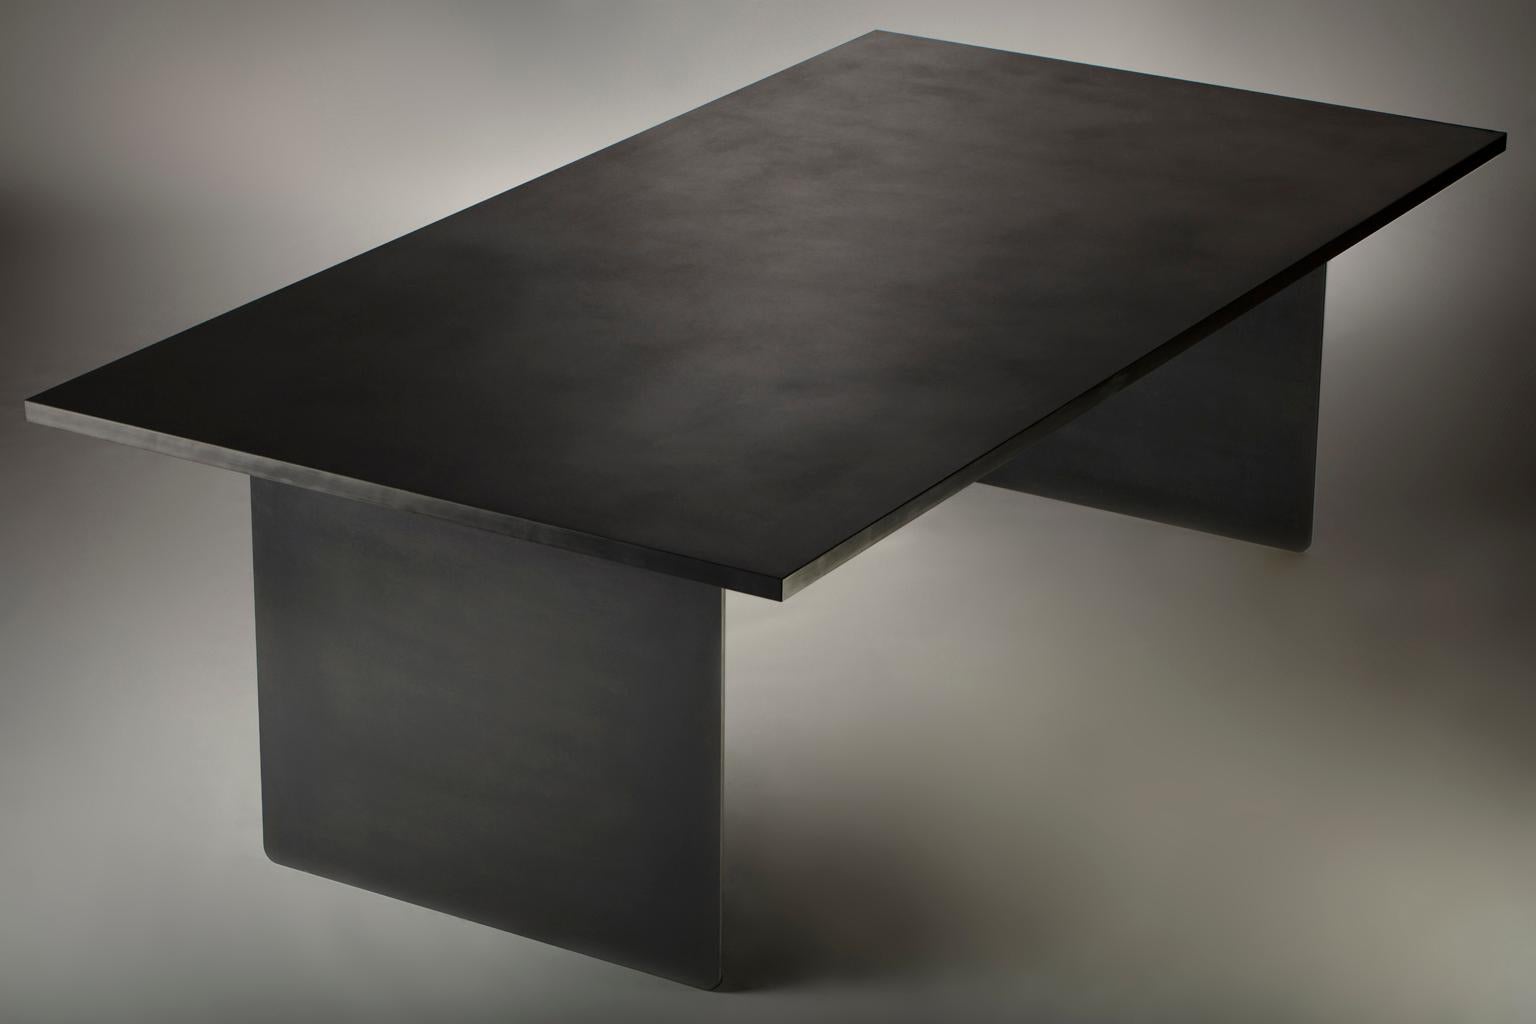 Collection I: Marianas table

The Marianas table is an expansive presence in a room. Featuring a tabletop constructed from Richlite, a paper-based material infused with resin, the Marianas table is soft to the touch, durable, and voluminous when